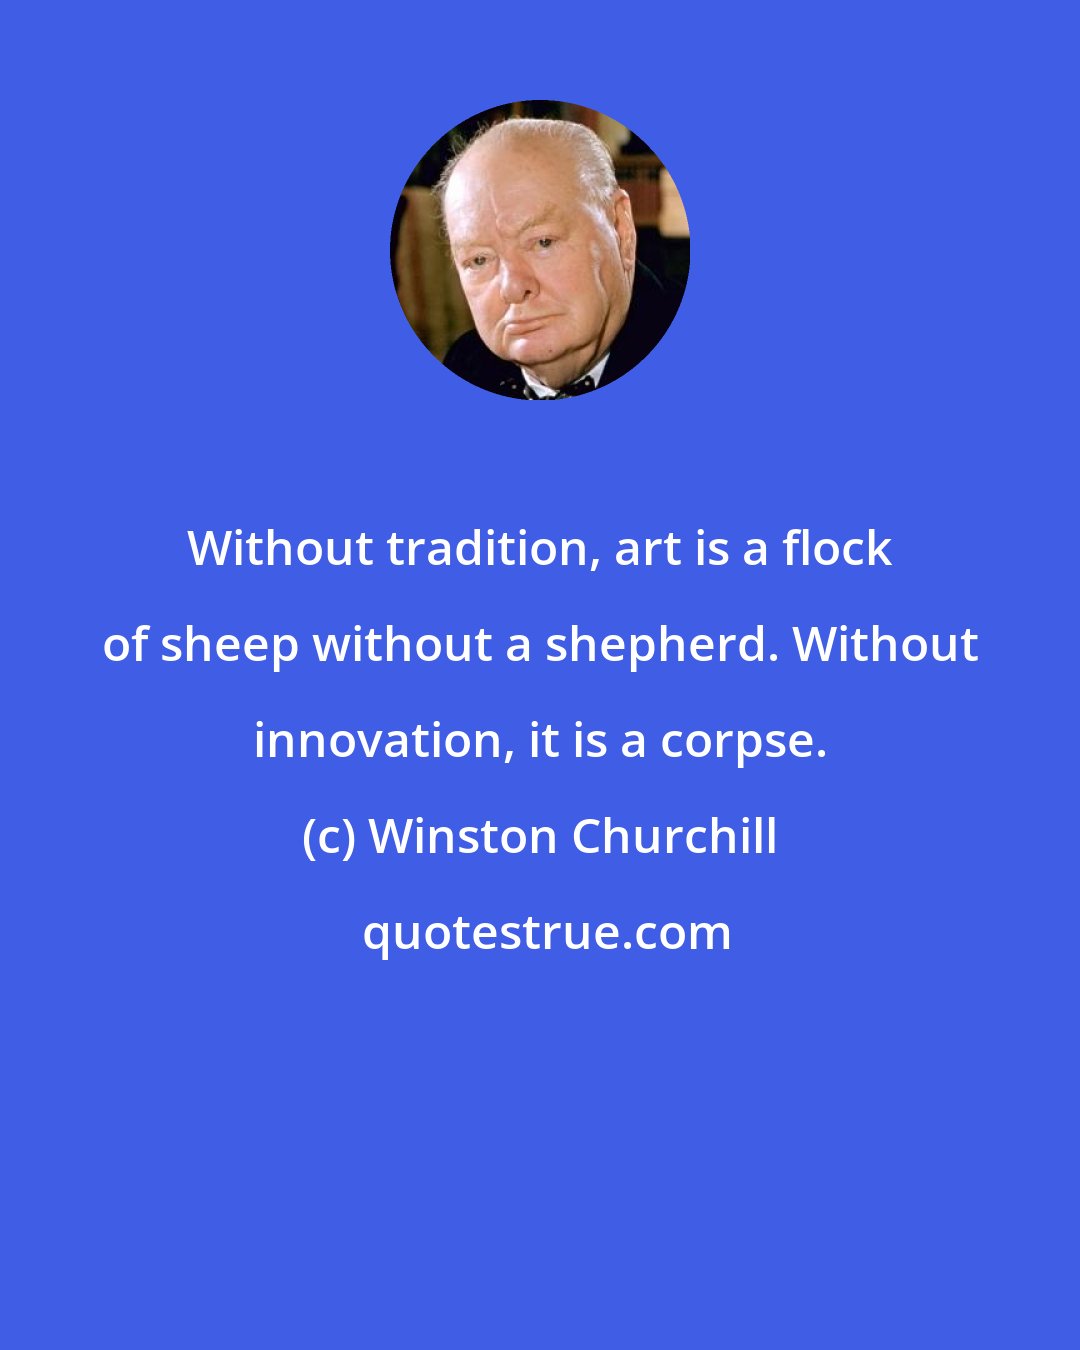 Winston Churchill: Without tradition, art is a flock of sheep without a shepherd. Without innovation, it is a corpse.